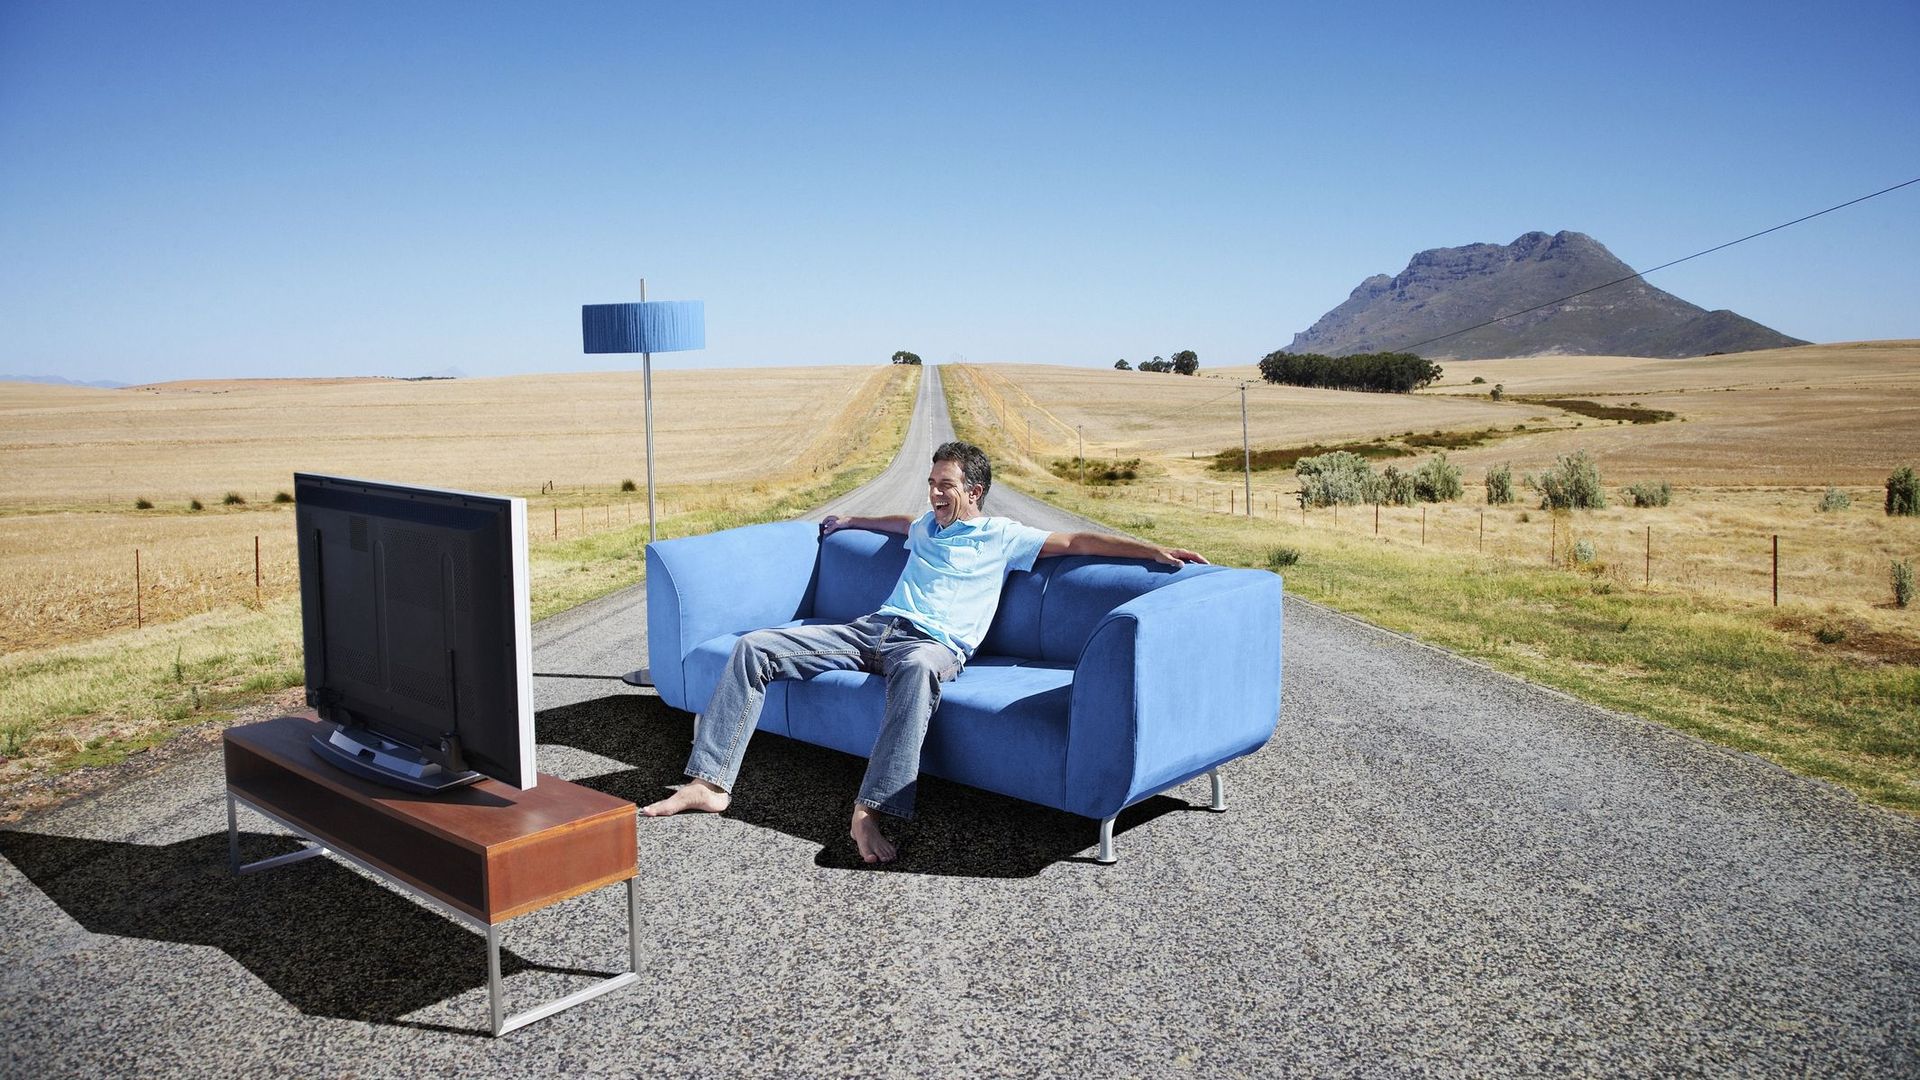 A man watching television on a couch in the road